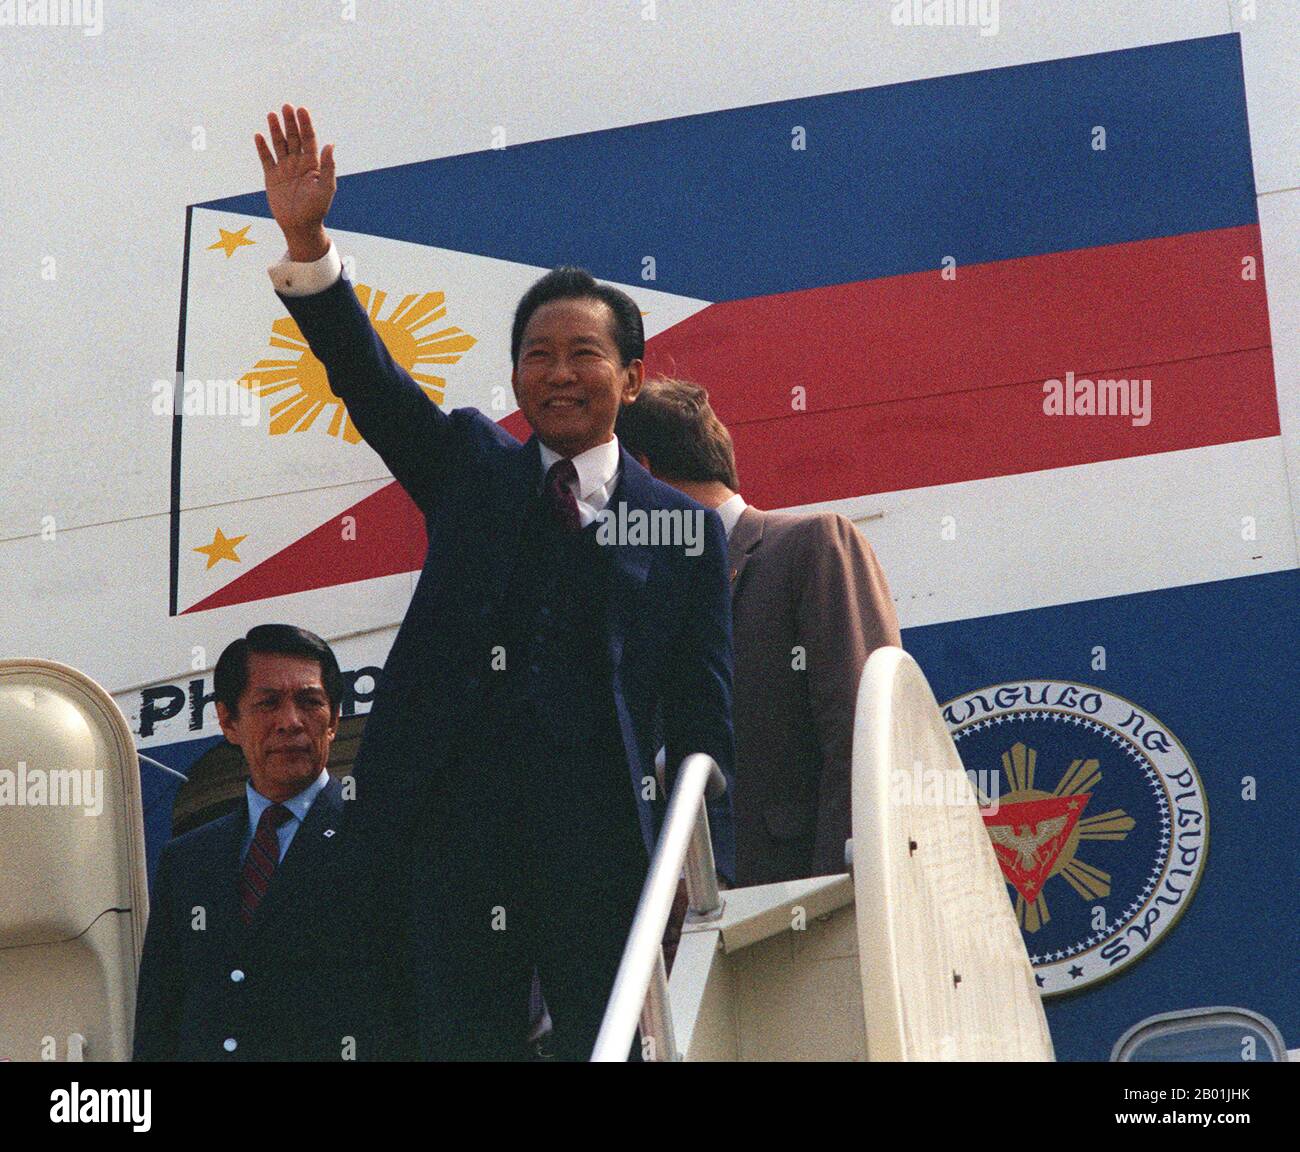 Philippines: President Ferdinand E. Marcos pauses to wave to the people waiting to welcome him as he arrives for a visit to Washington DC, USA, 1 May 1983.  Ferdinand Emmanuel Edralin Marcos (11 September 1917 - 28 September 1989) was the 10th President of the Philippines from 1965 to 1986. He was a lawyer, member of the Philippine House of Representatives (1949-1959) and a member of the Philippine Senate (1959-1965).  In 1983, his government was implicated in the assassination of his primary political opponent, Benigno Aquino, Jr. Stock Photo